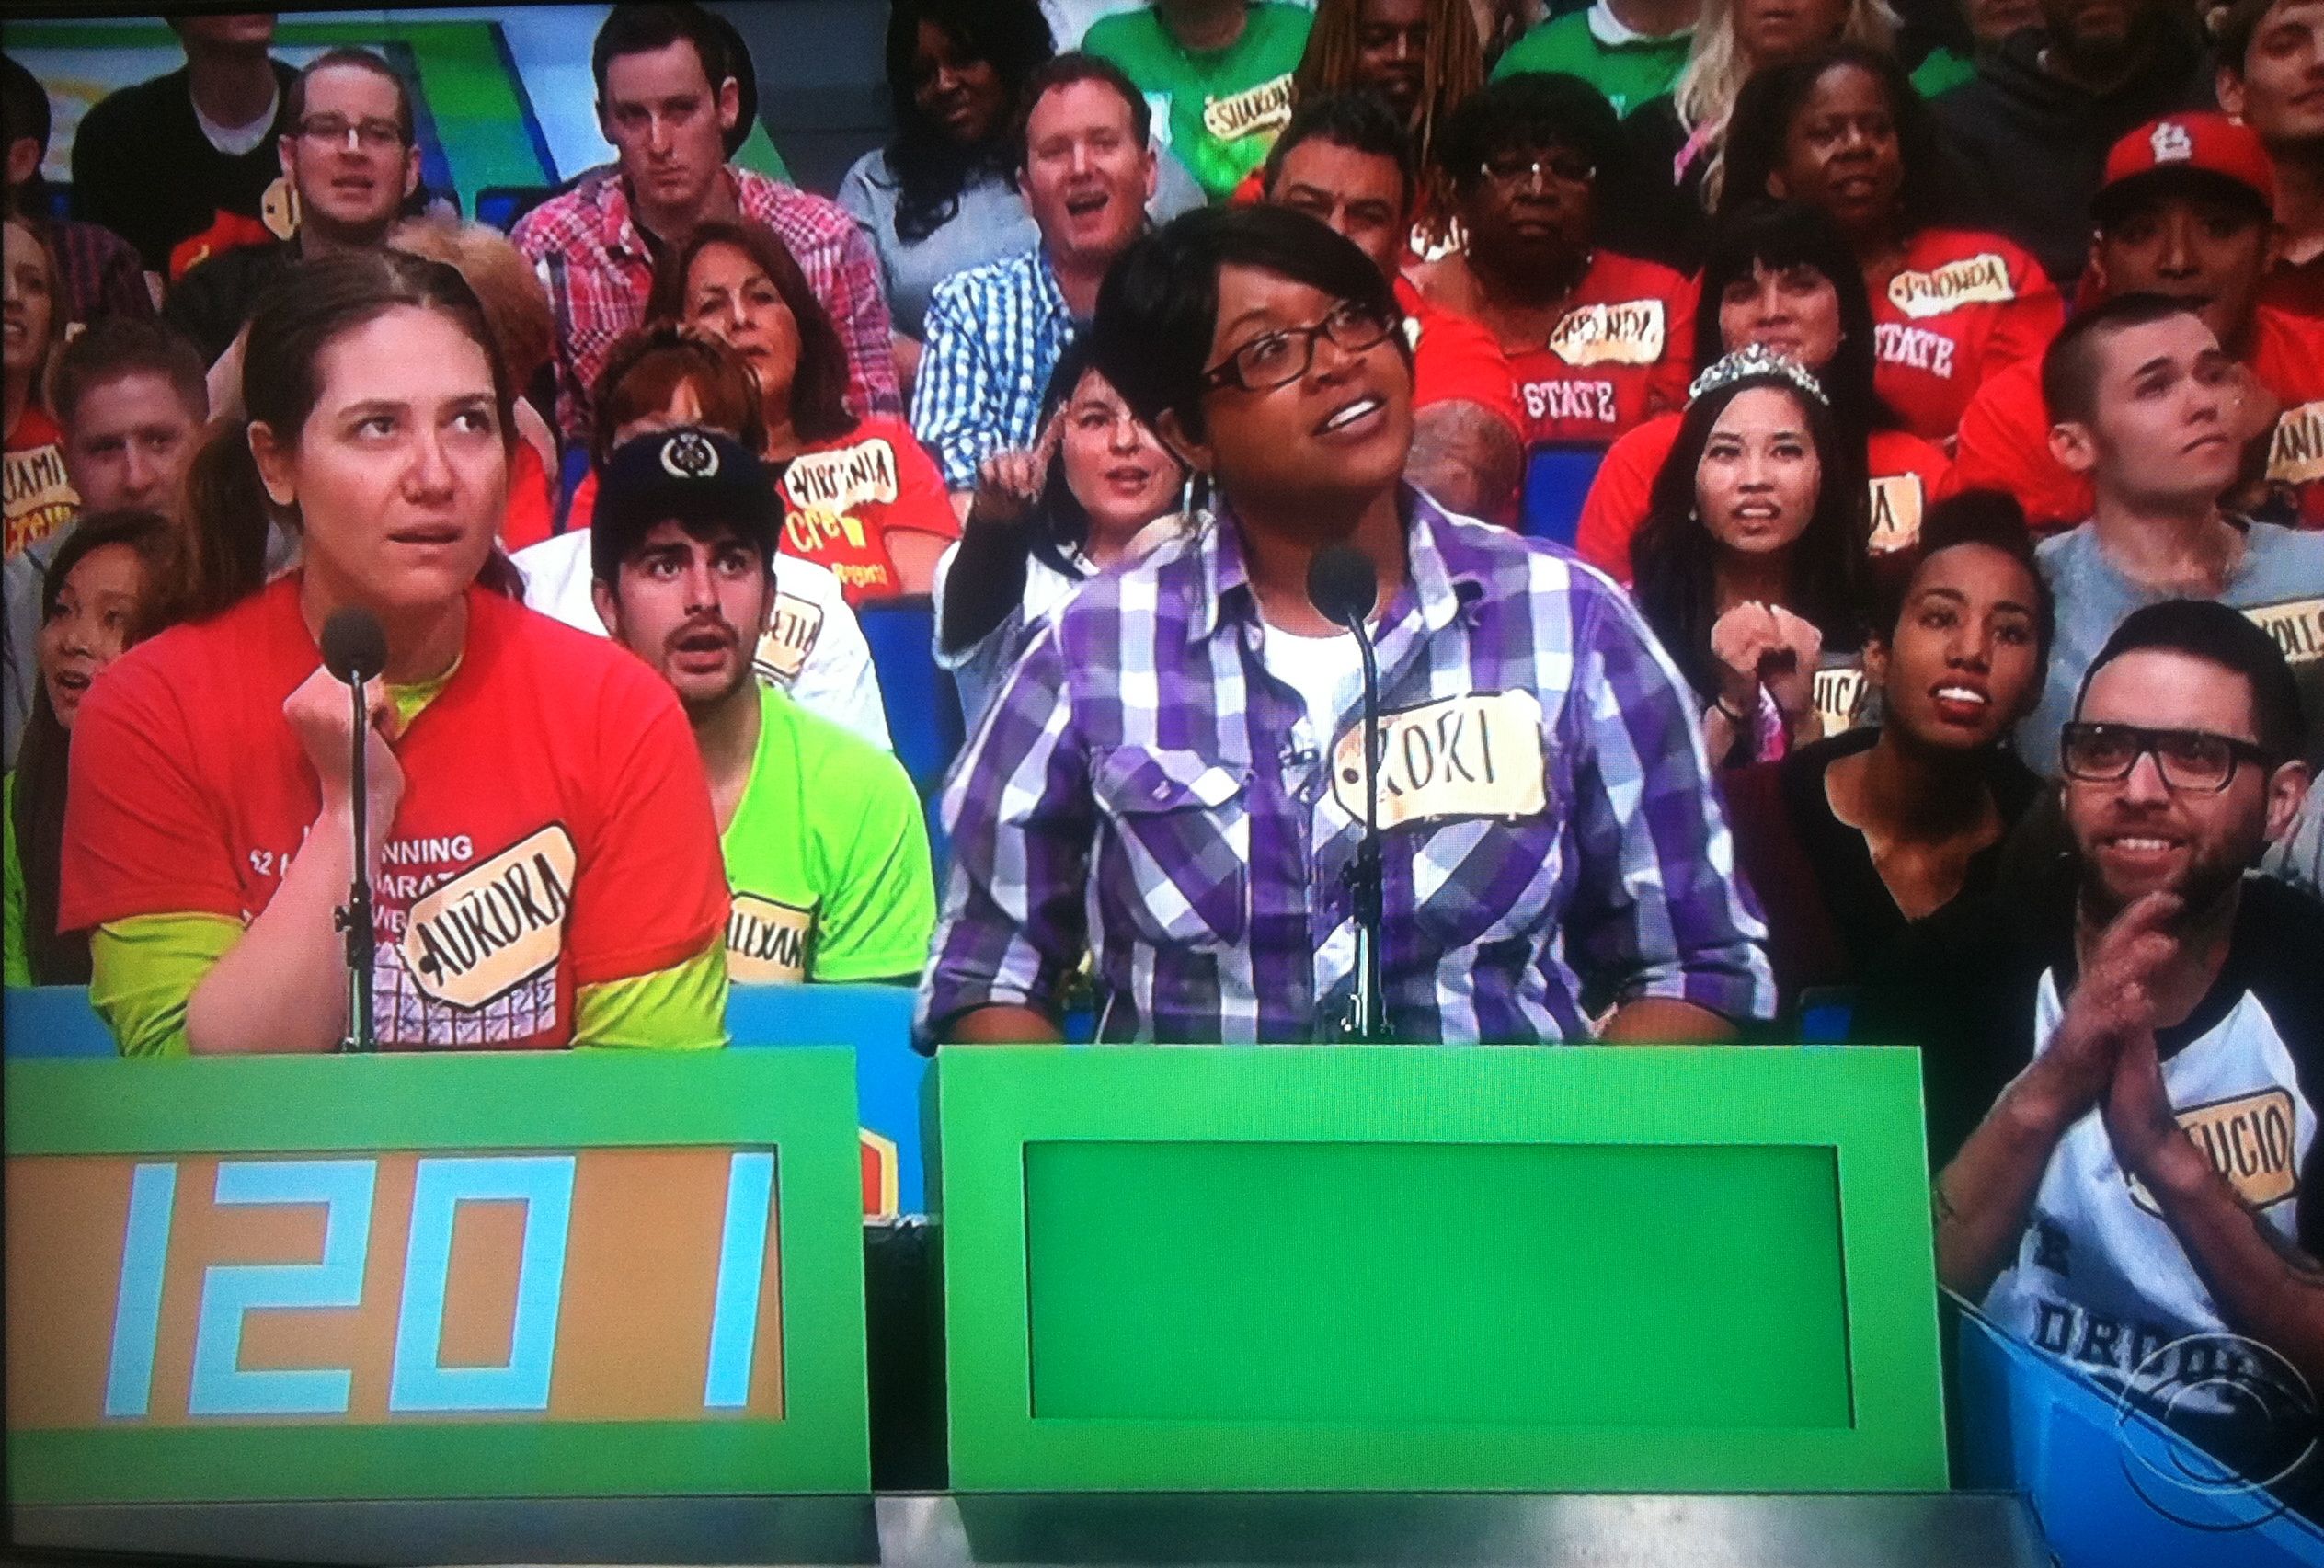 Aurora De Lucia nervous in contestant's row on The Price is Right